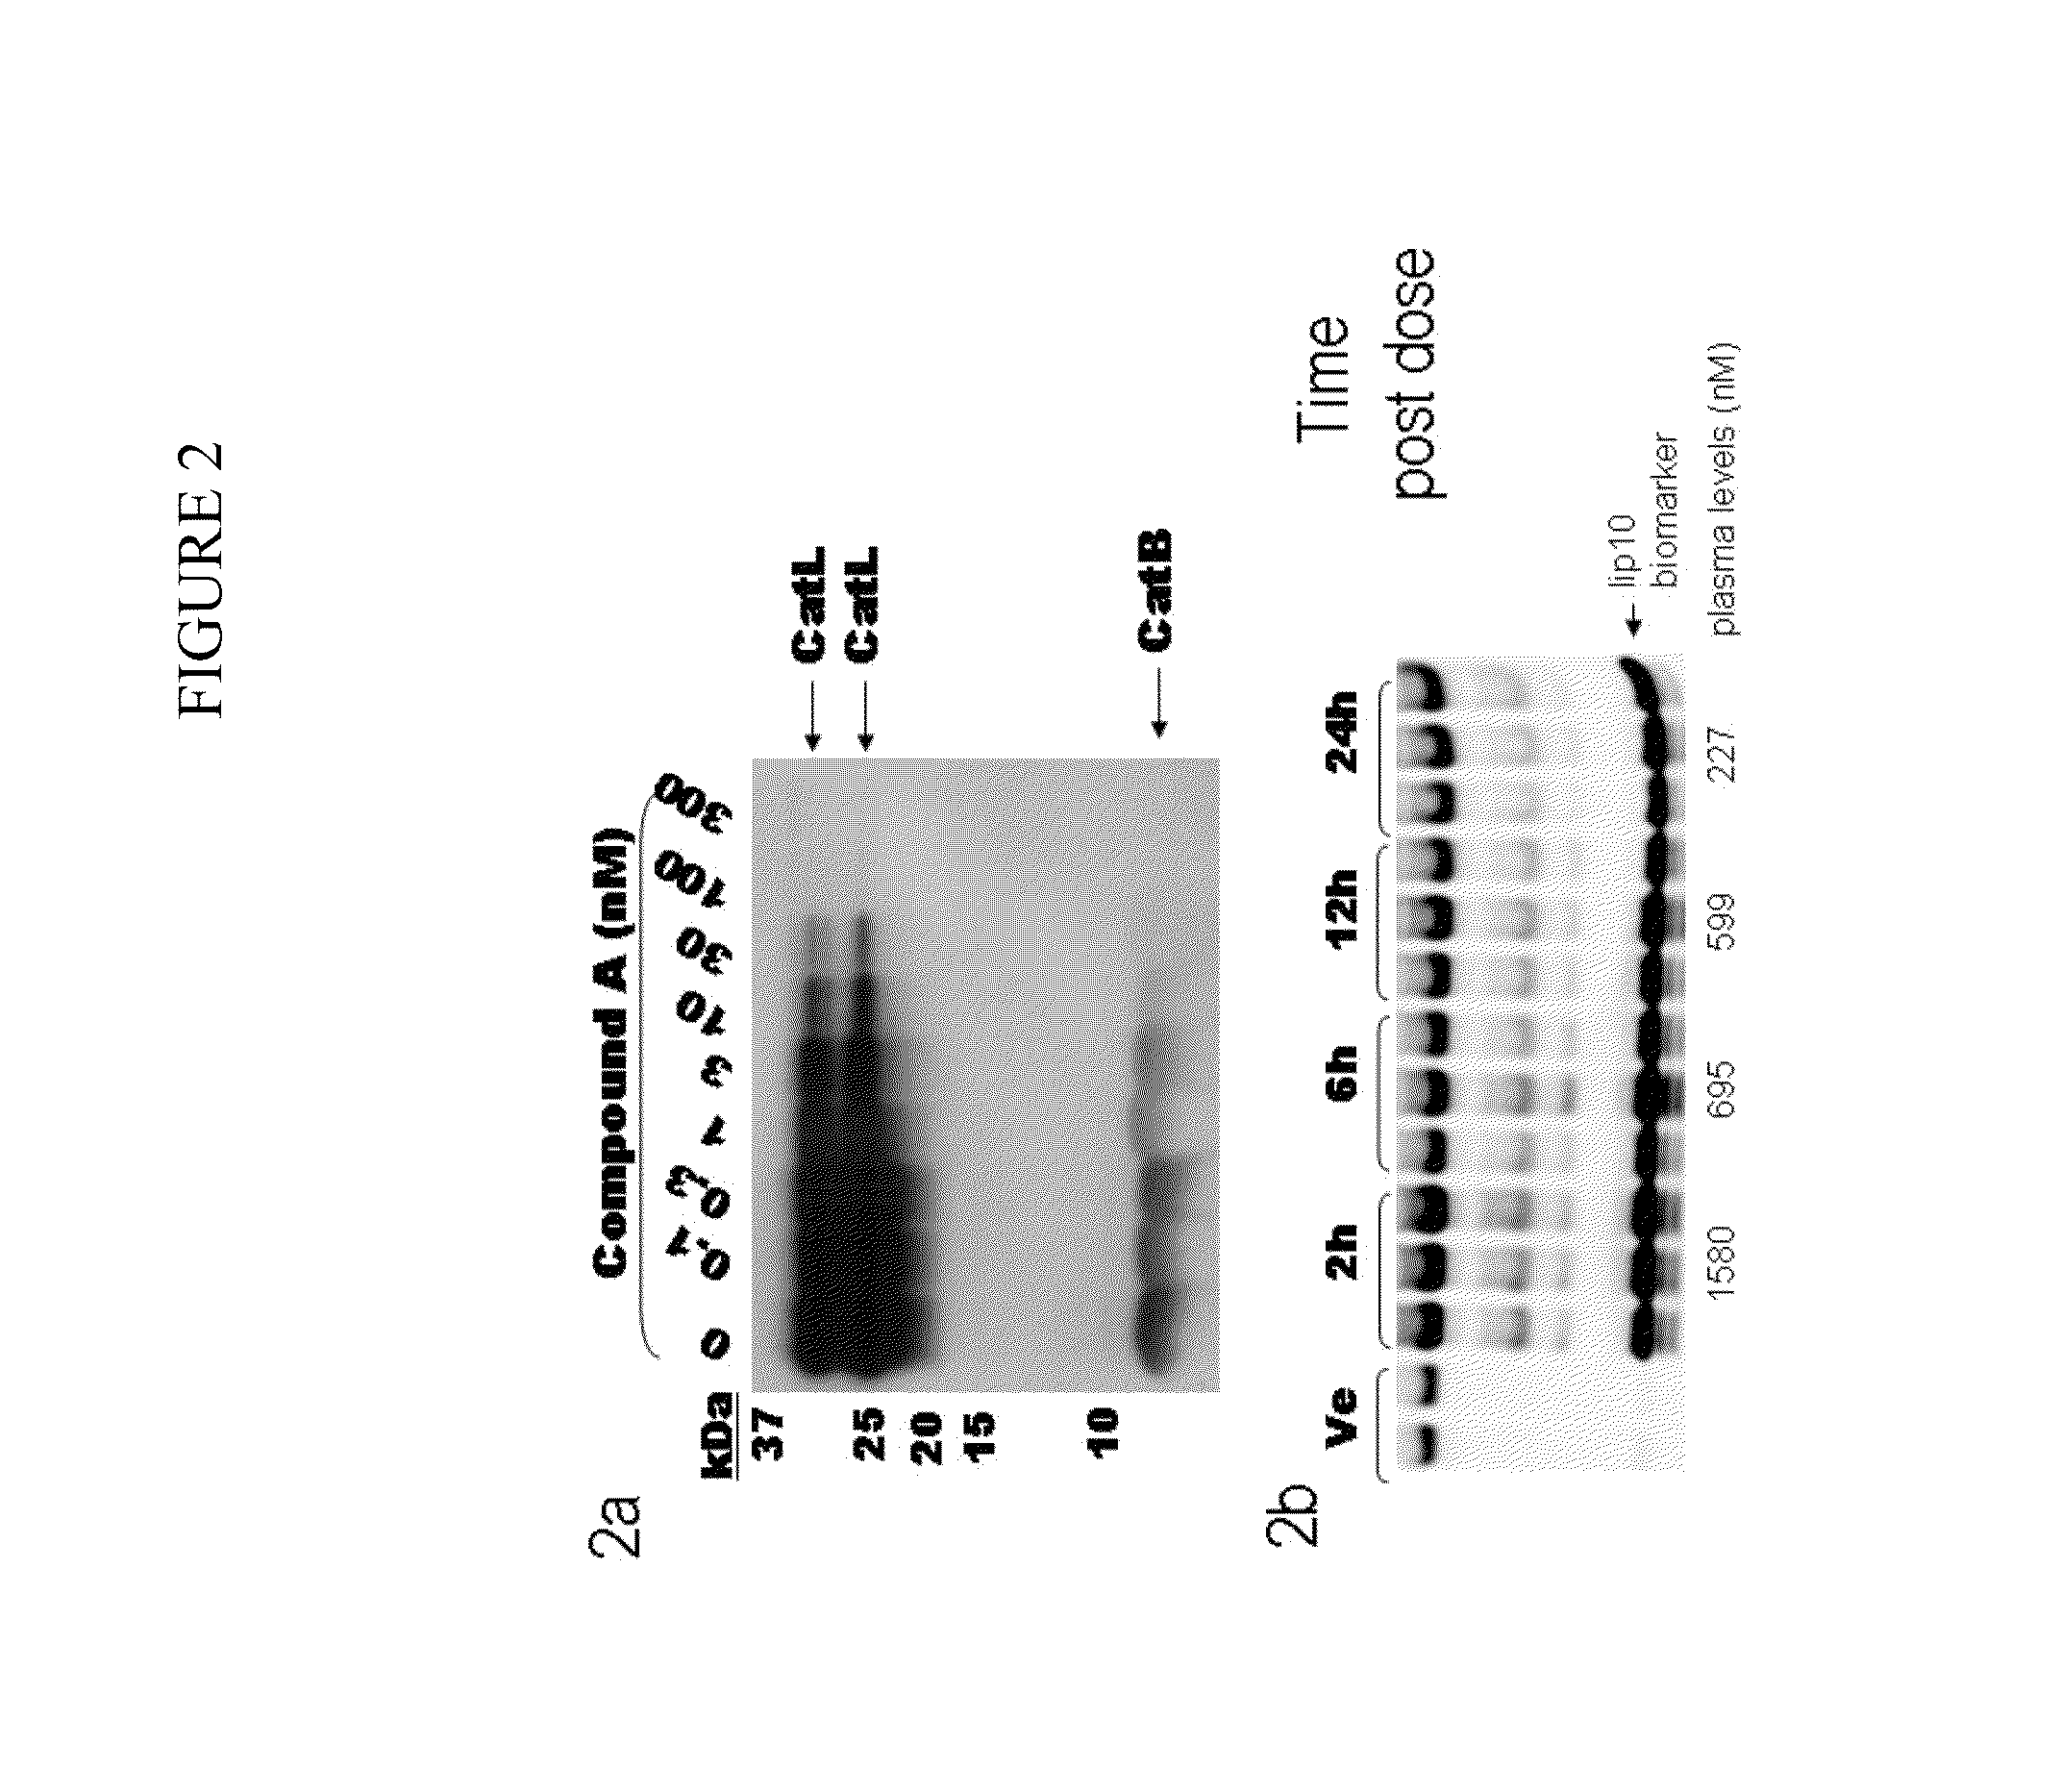 Cathepsin inhibitors for the treatment of bone cancer and bone cancer pain